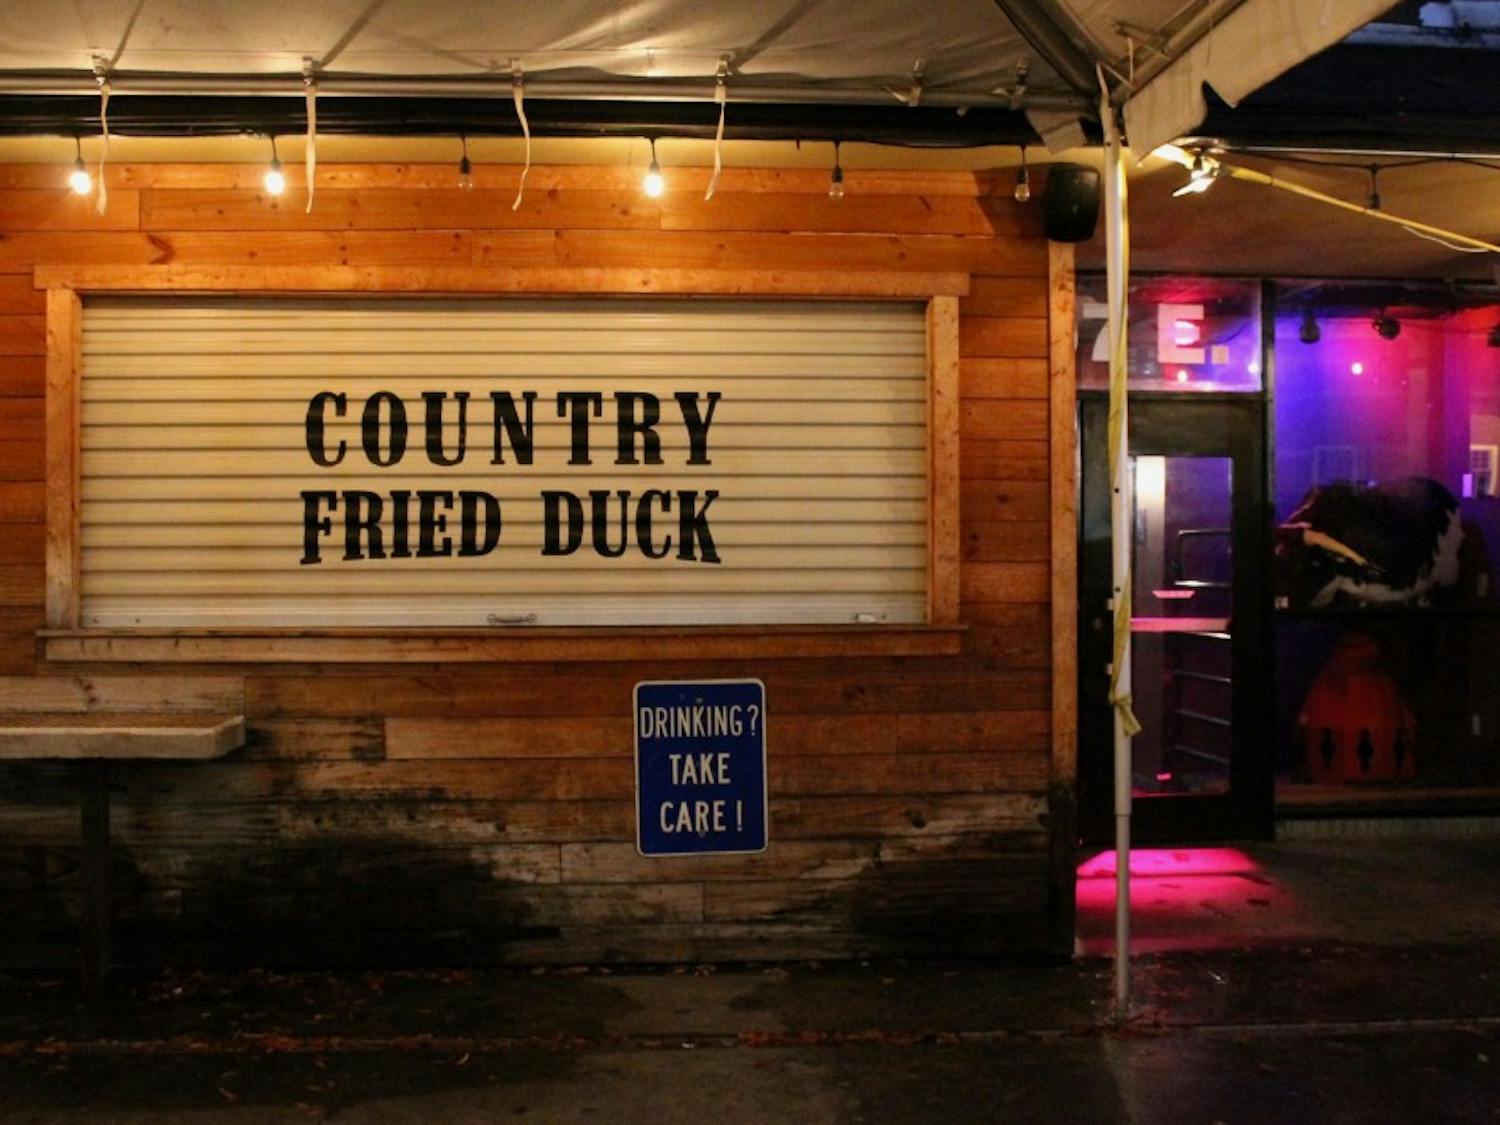 Country Fried Duck lost its liquor license, however it reopened with the new name "Night School" and a new liquor license.